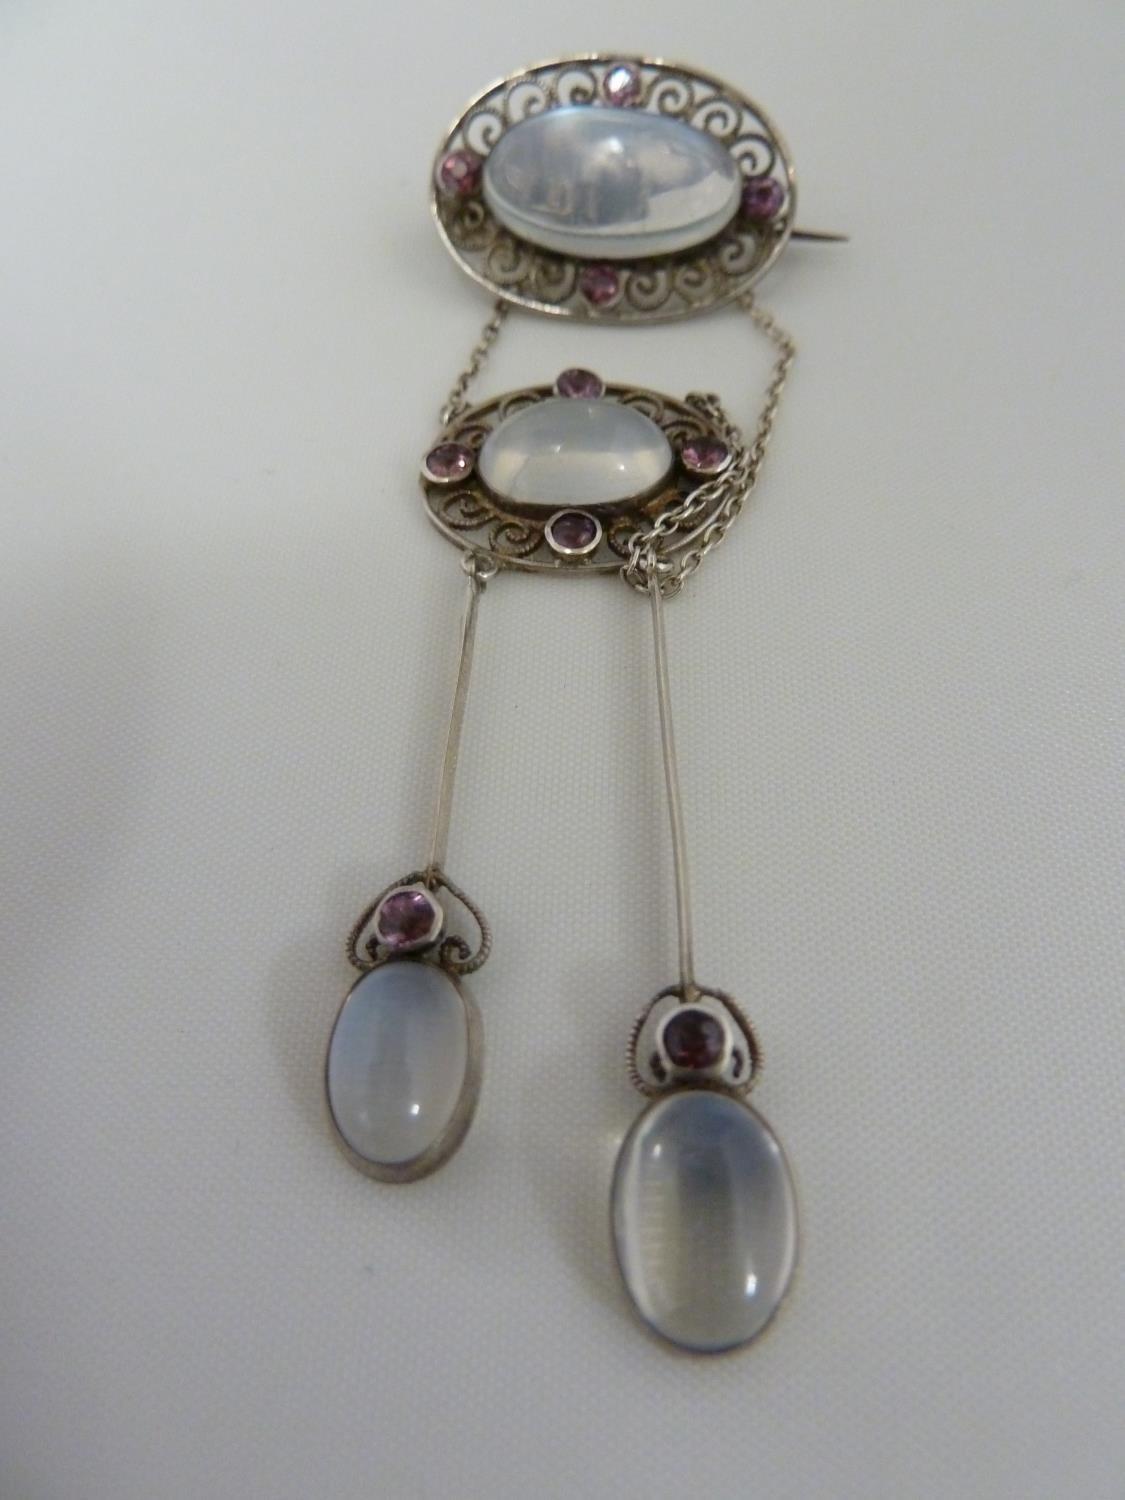 A Belle Epoque pendant and brooch set, the white metal filigree work supporting oval moonstones - Image 3 of 7